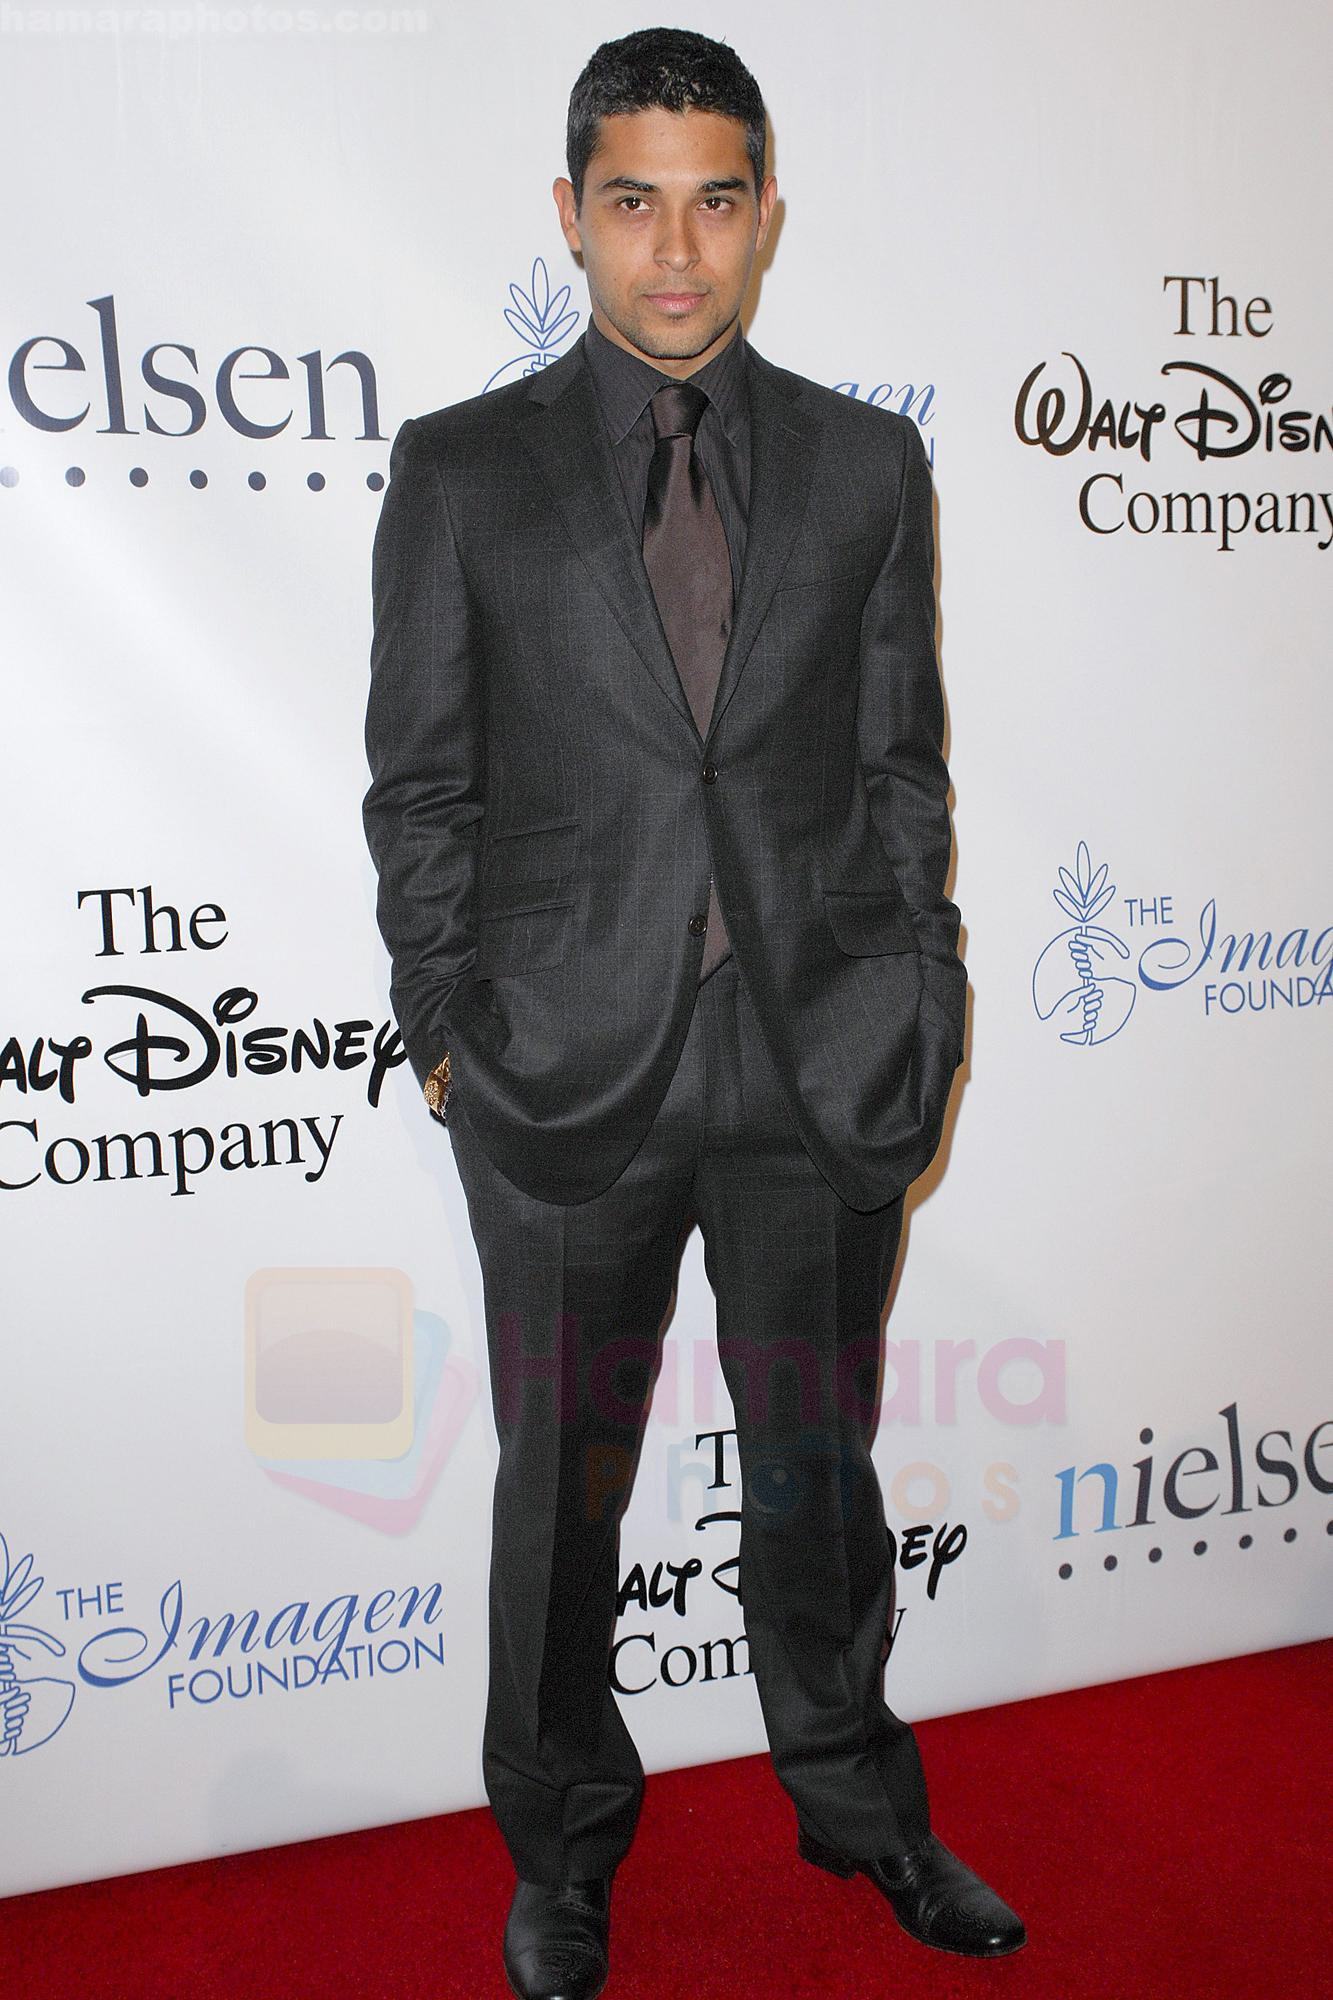 Wilmer Valderrama at the 24th Annual Imagen Awards held at the Beverly Hilton Hotel Los Angeles, California on 21.08.09 - IANS-WENN 